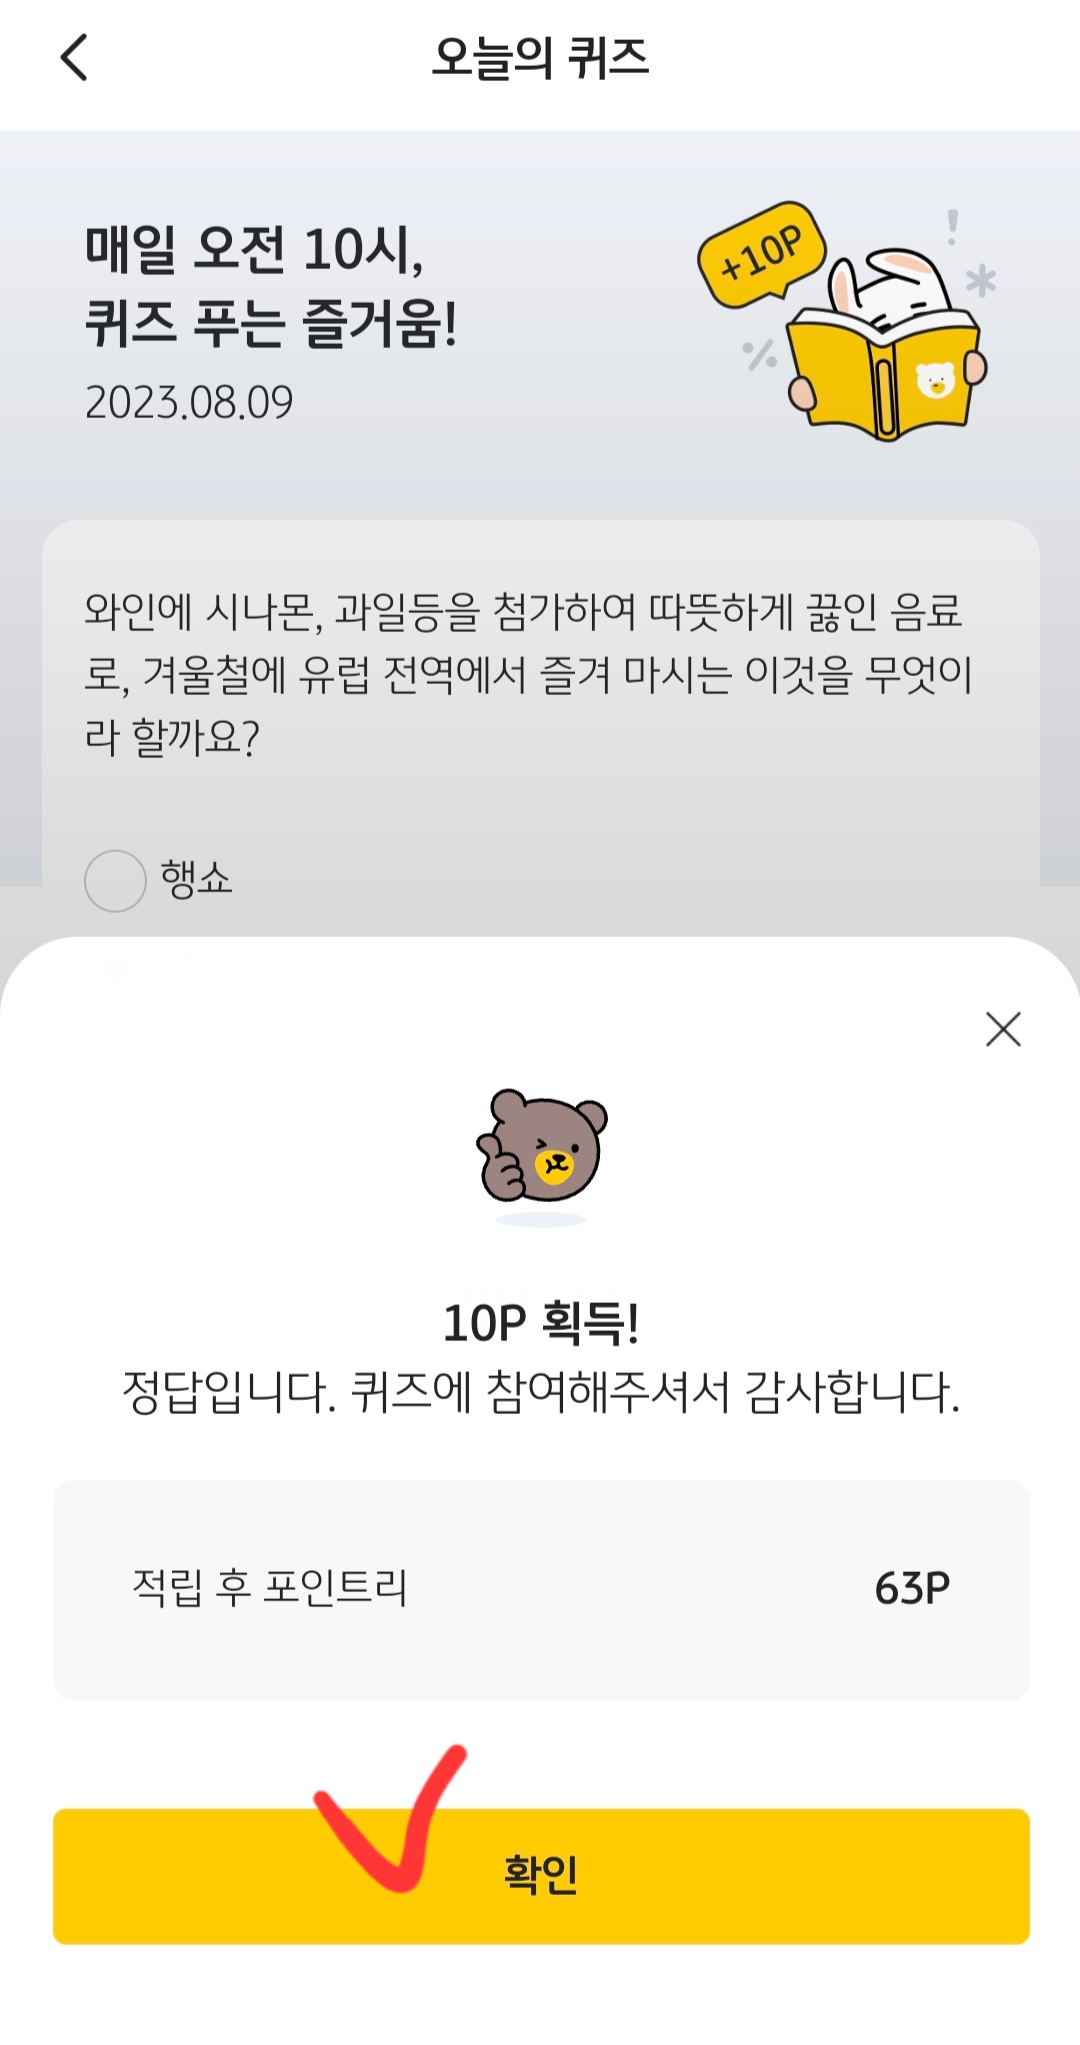 kb pay 앱